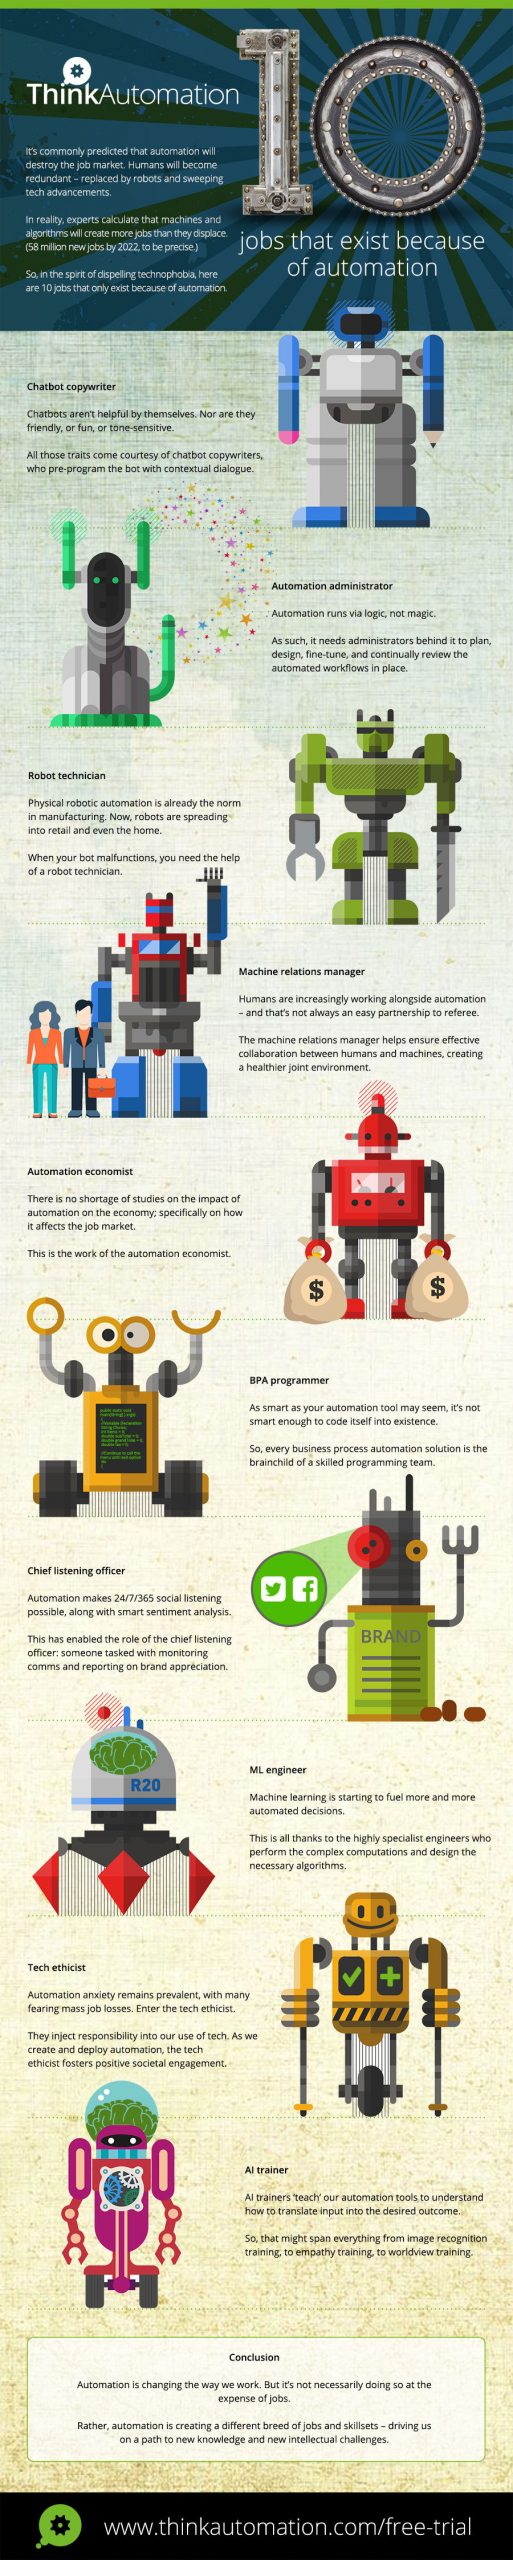 Info graphic - 10 jobs that exist because of automation